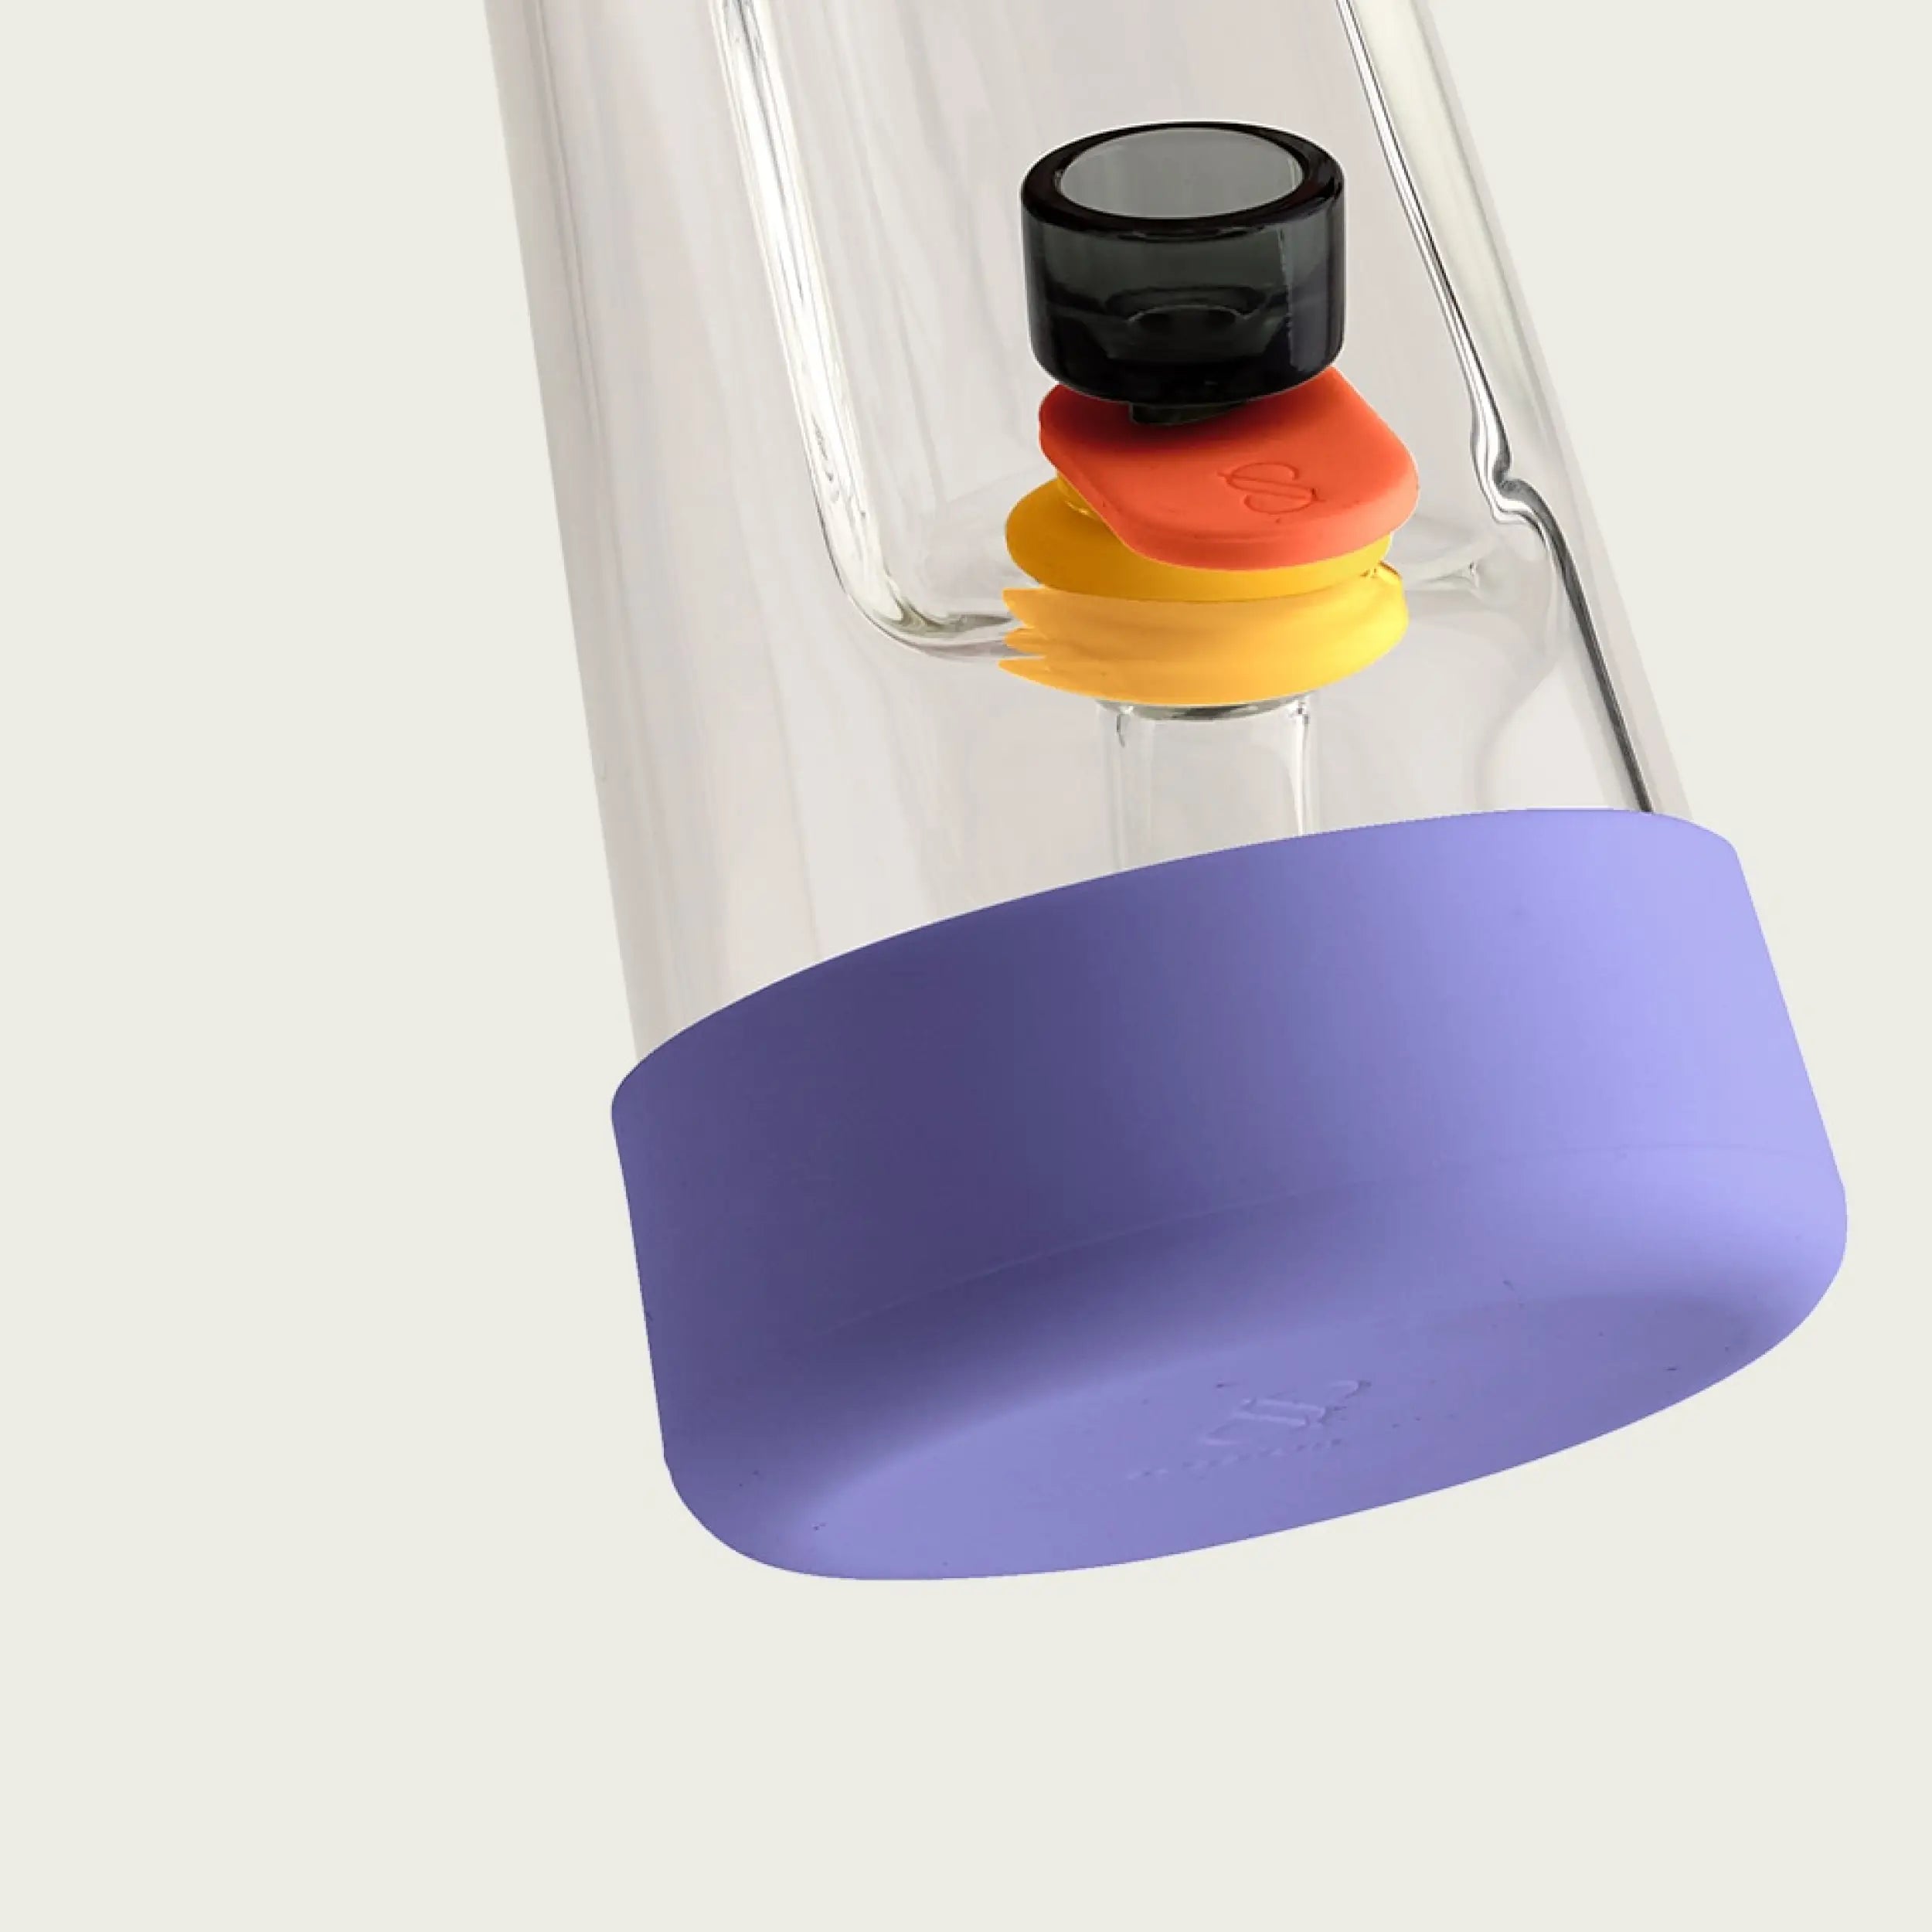 session goods bong is made from heat tempered borosilicate glass, and has extra protection with silicone footer, and comes with extra parts